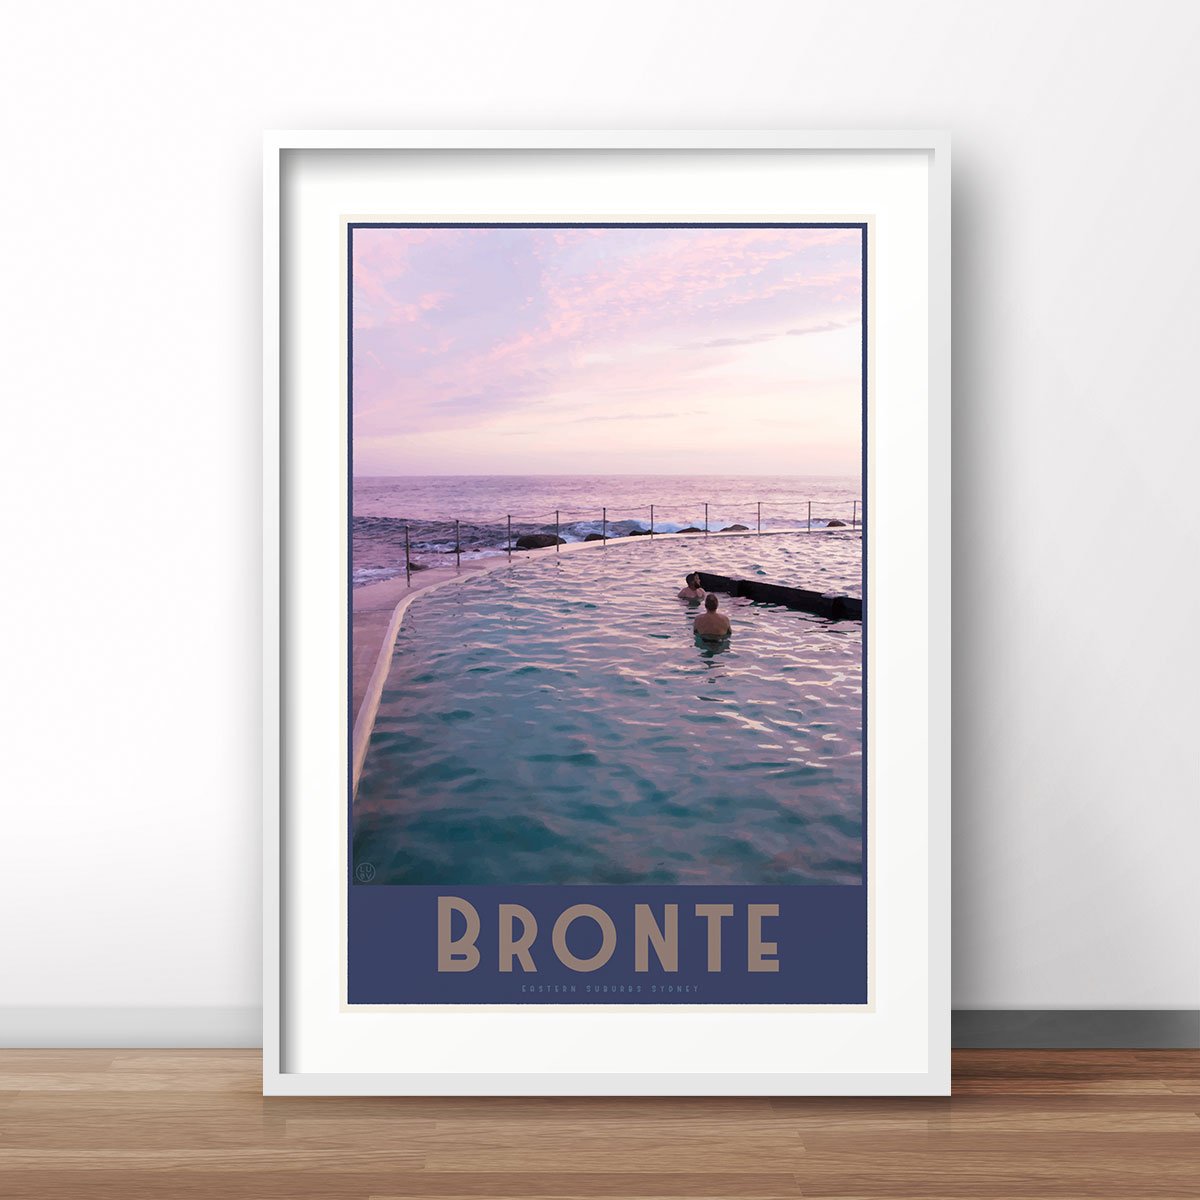 Bronte vintage travel style white framed prints by places we luv